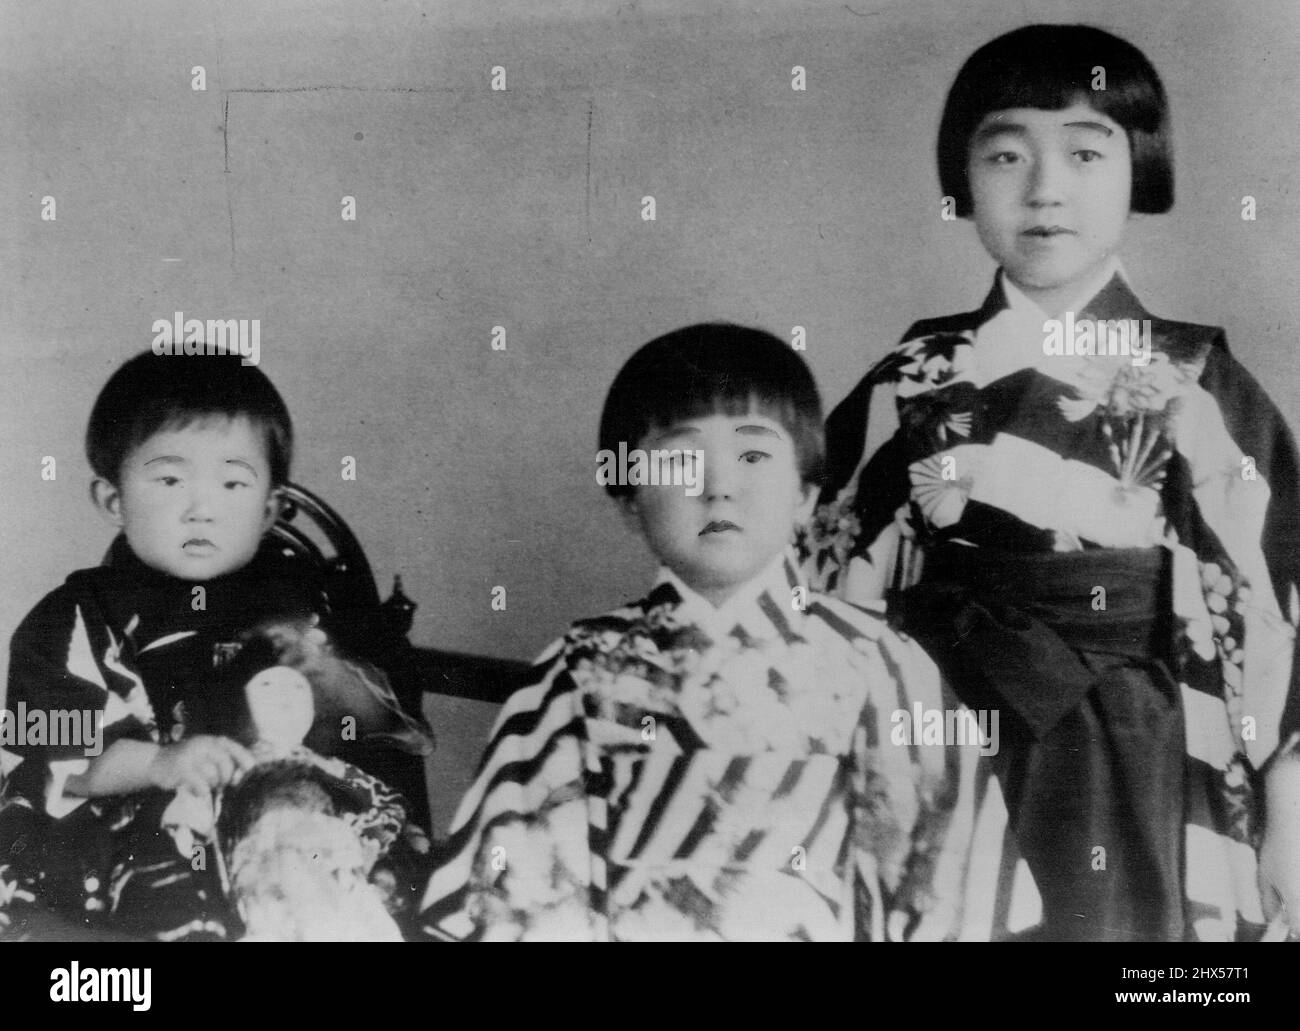 Japan's Little Princesses -- Here Are the three little daughters of Emperor Hirohito, of Japan. Left to right they are: Princess Yori, aged 2; Princess Taka, 3; and Princess Teru, aged 7. March 13, 1933. (Photo by The Associated Press Ltd.). Stock Photo